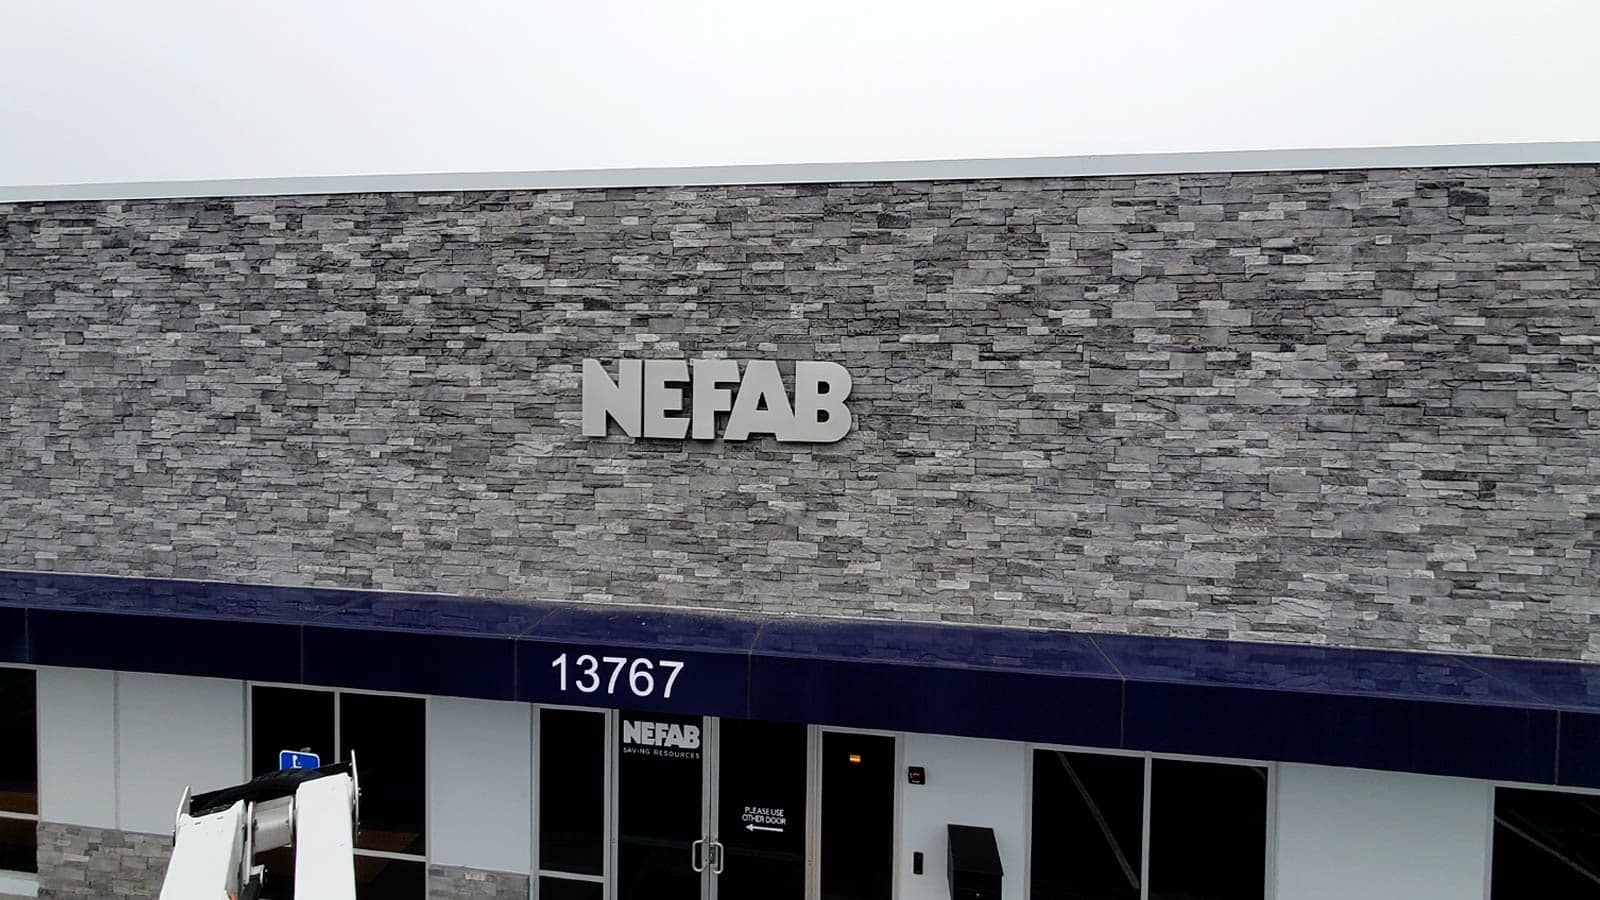 Nefab 3D sign mounted on the facade